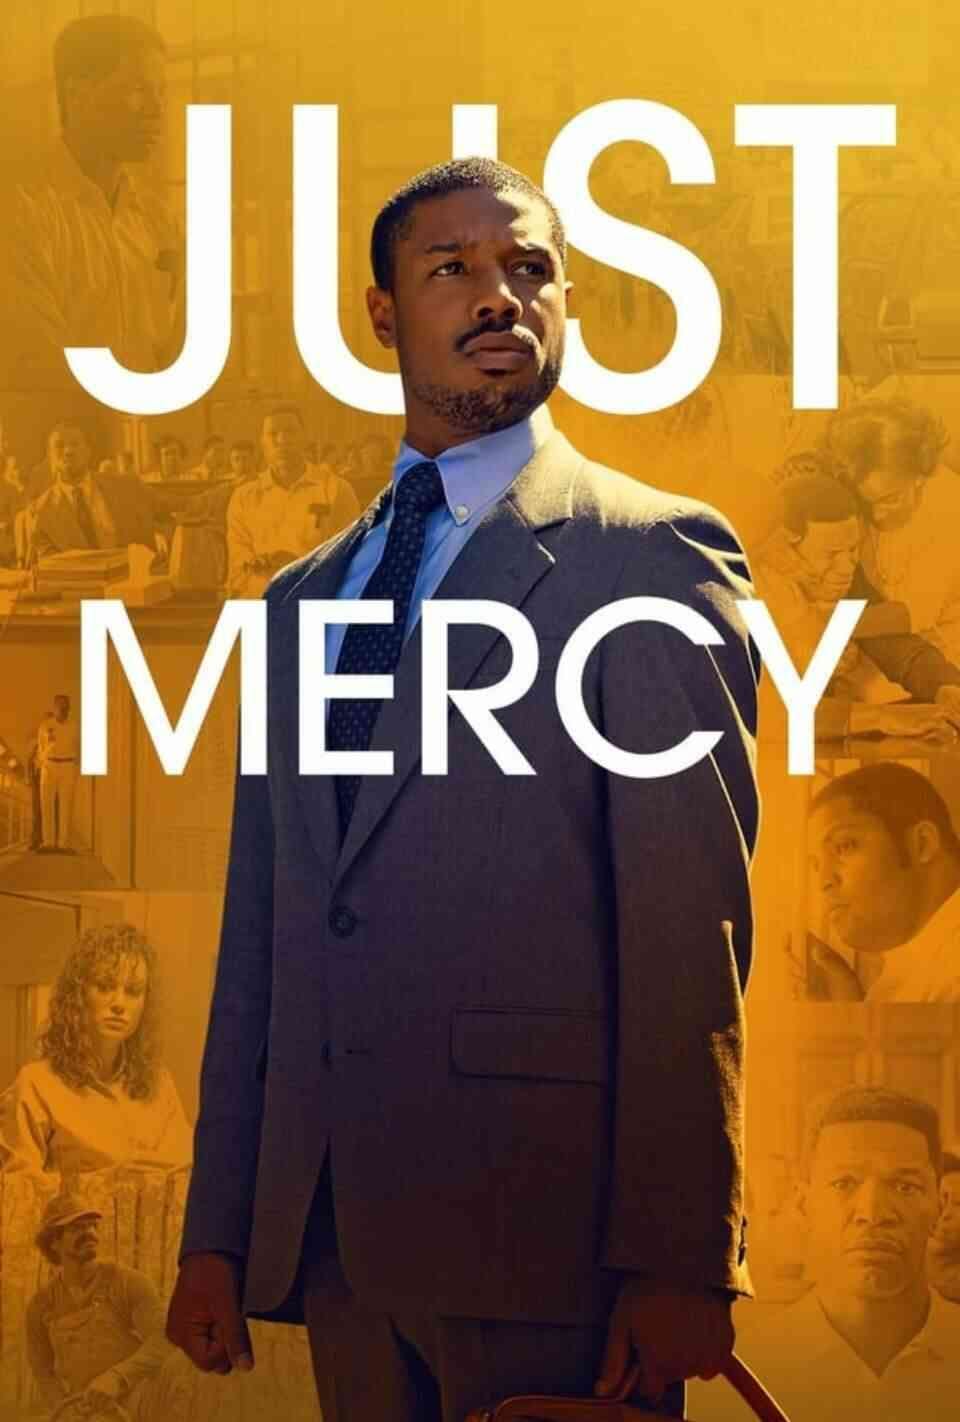 Read Just Mercy screenplay (poster)